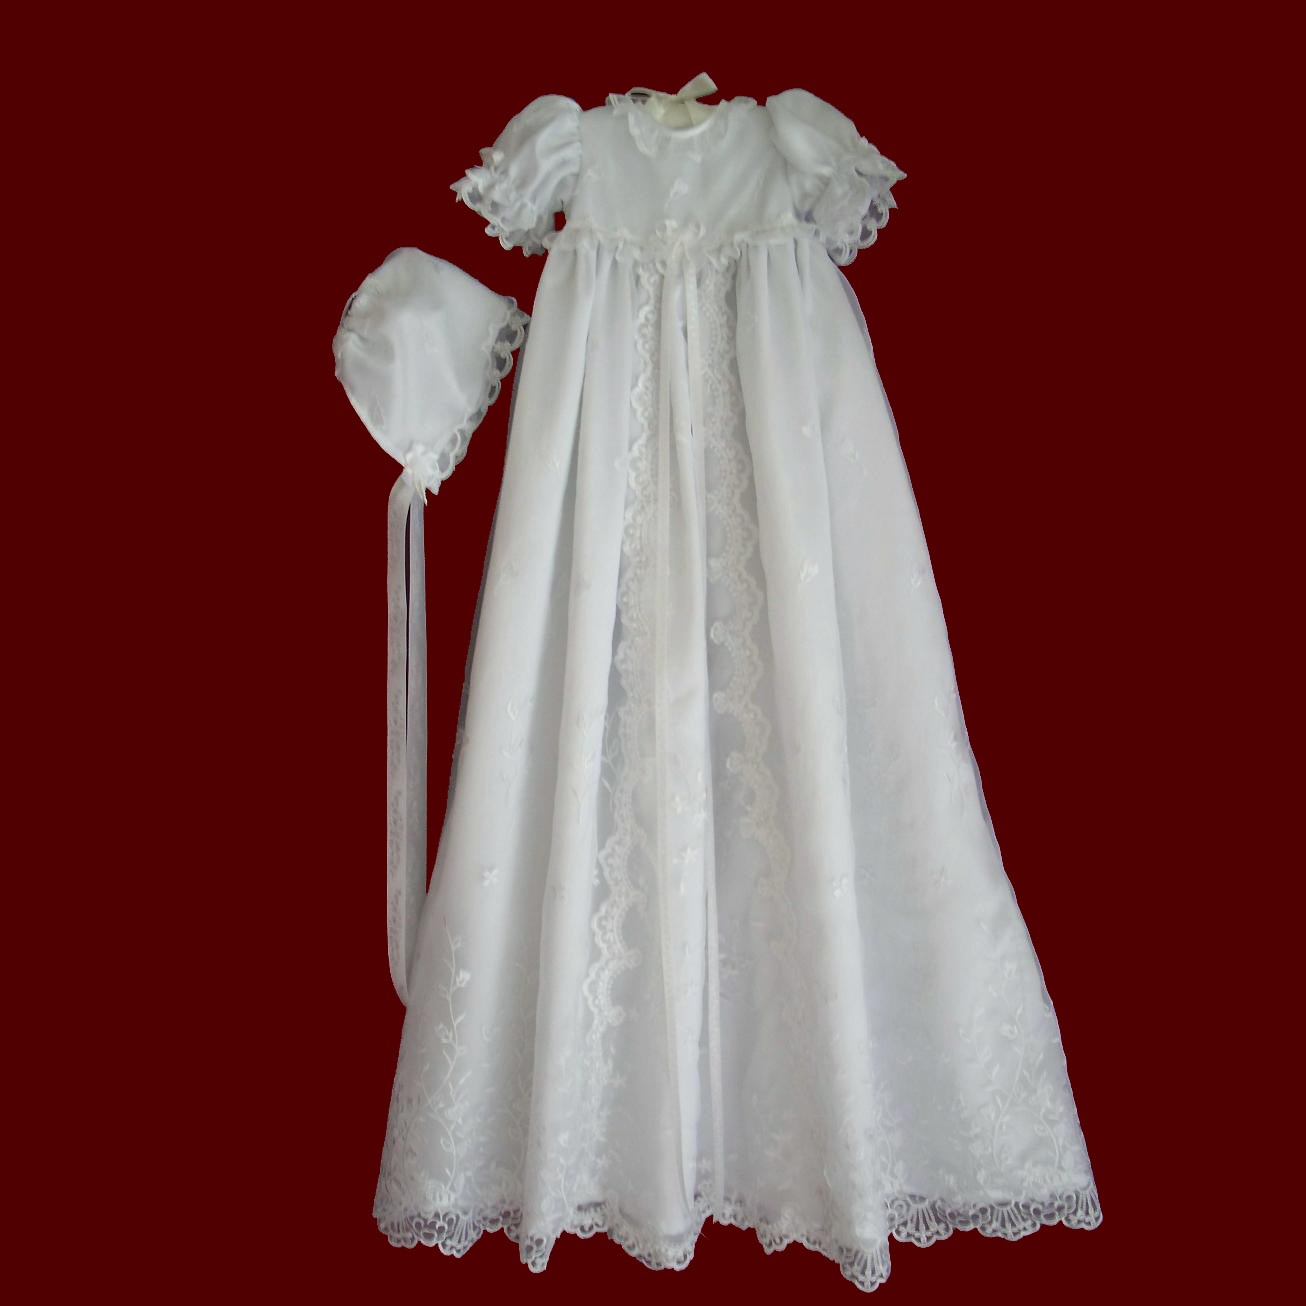 Embroidered Organza With Hearts Christening Gown, Slip & Bonnet